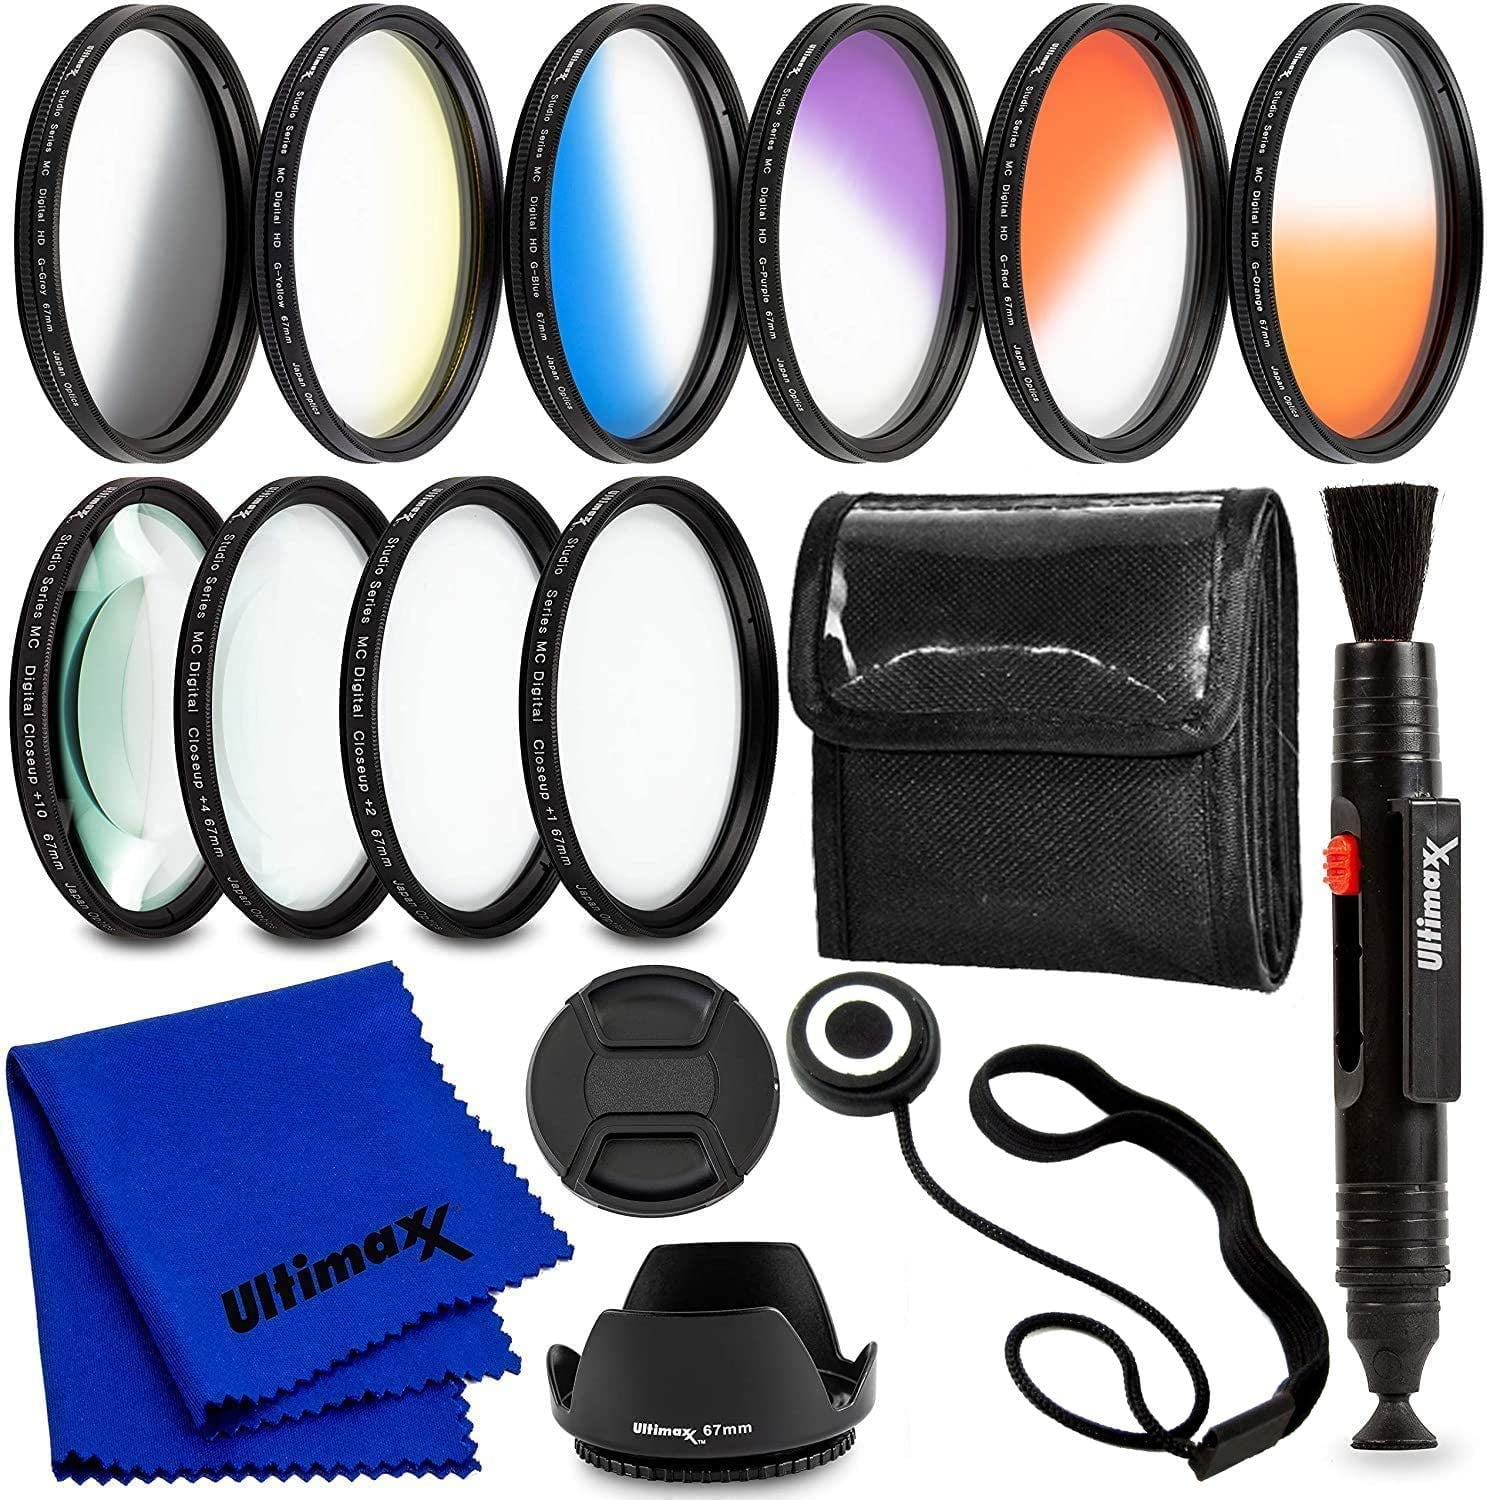 Ultimaxx 58MM Complete Lens Filter Accessory Kit for Lenses with 58MM Filter Size Designed Specifically for: Canon EOS 9000D 800D 760D 750D 700D 1300D 1200D T100, 4000D, 3000D, 2000D DSLR Cameras